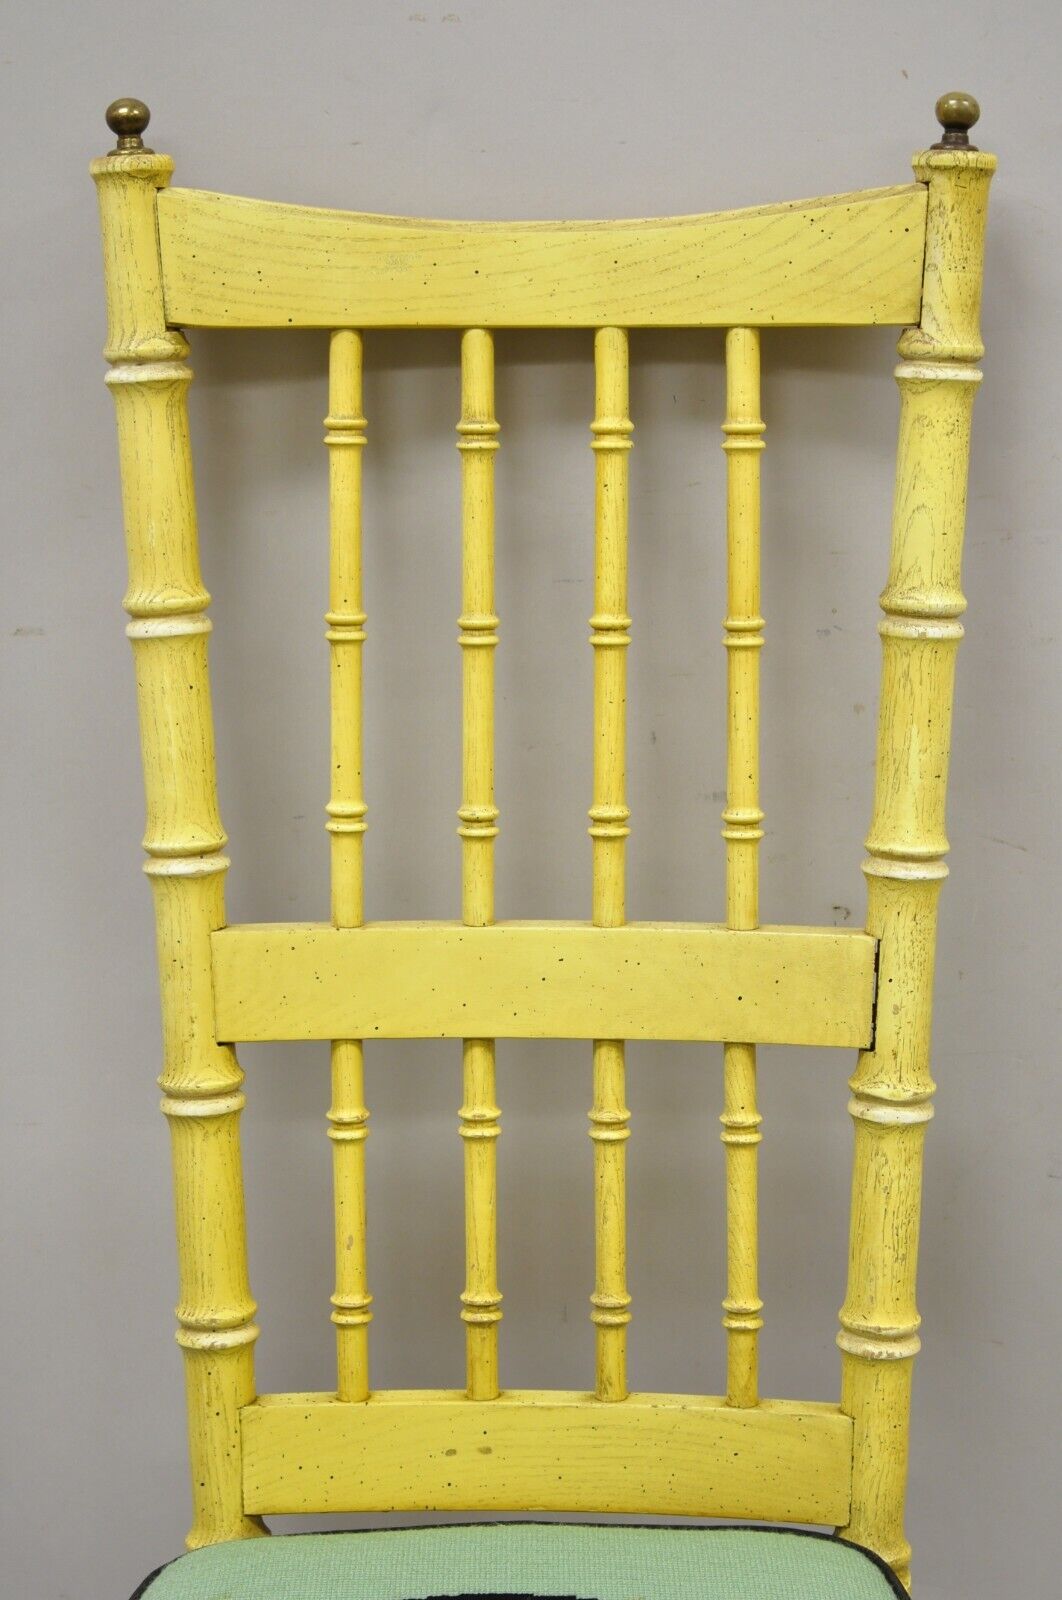 Thomasville Faux Bamboo Chinese Chippendale Brass Finial Wood Chairs - Set of 6